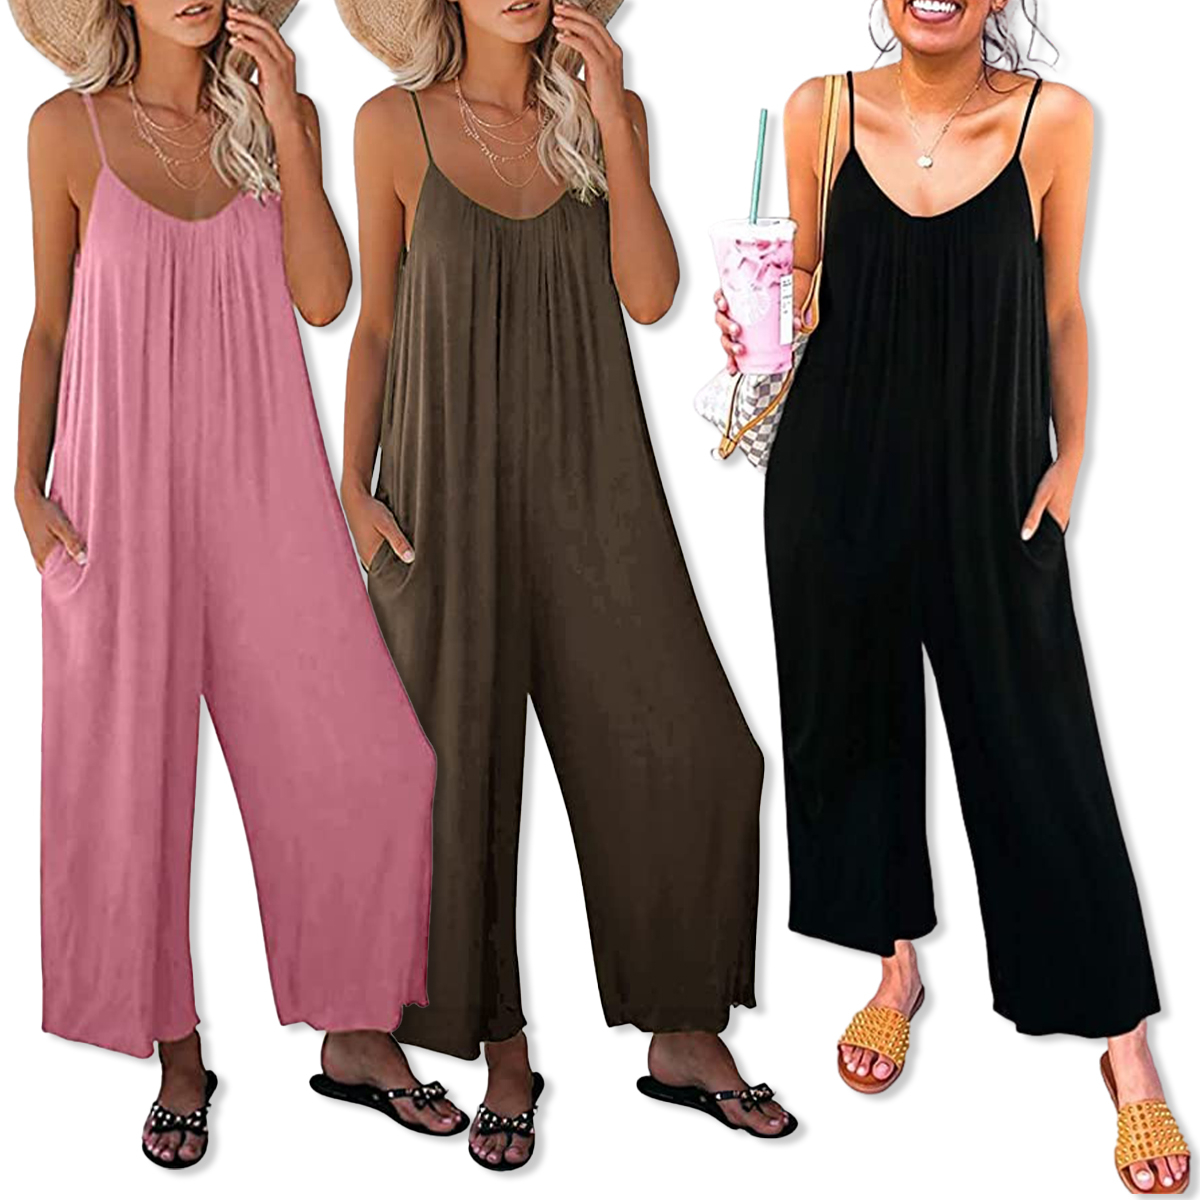 This $28 Size-Inclusive Jumpsuit Is a Top-Rated Amazon Favorite